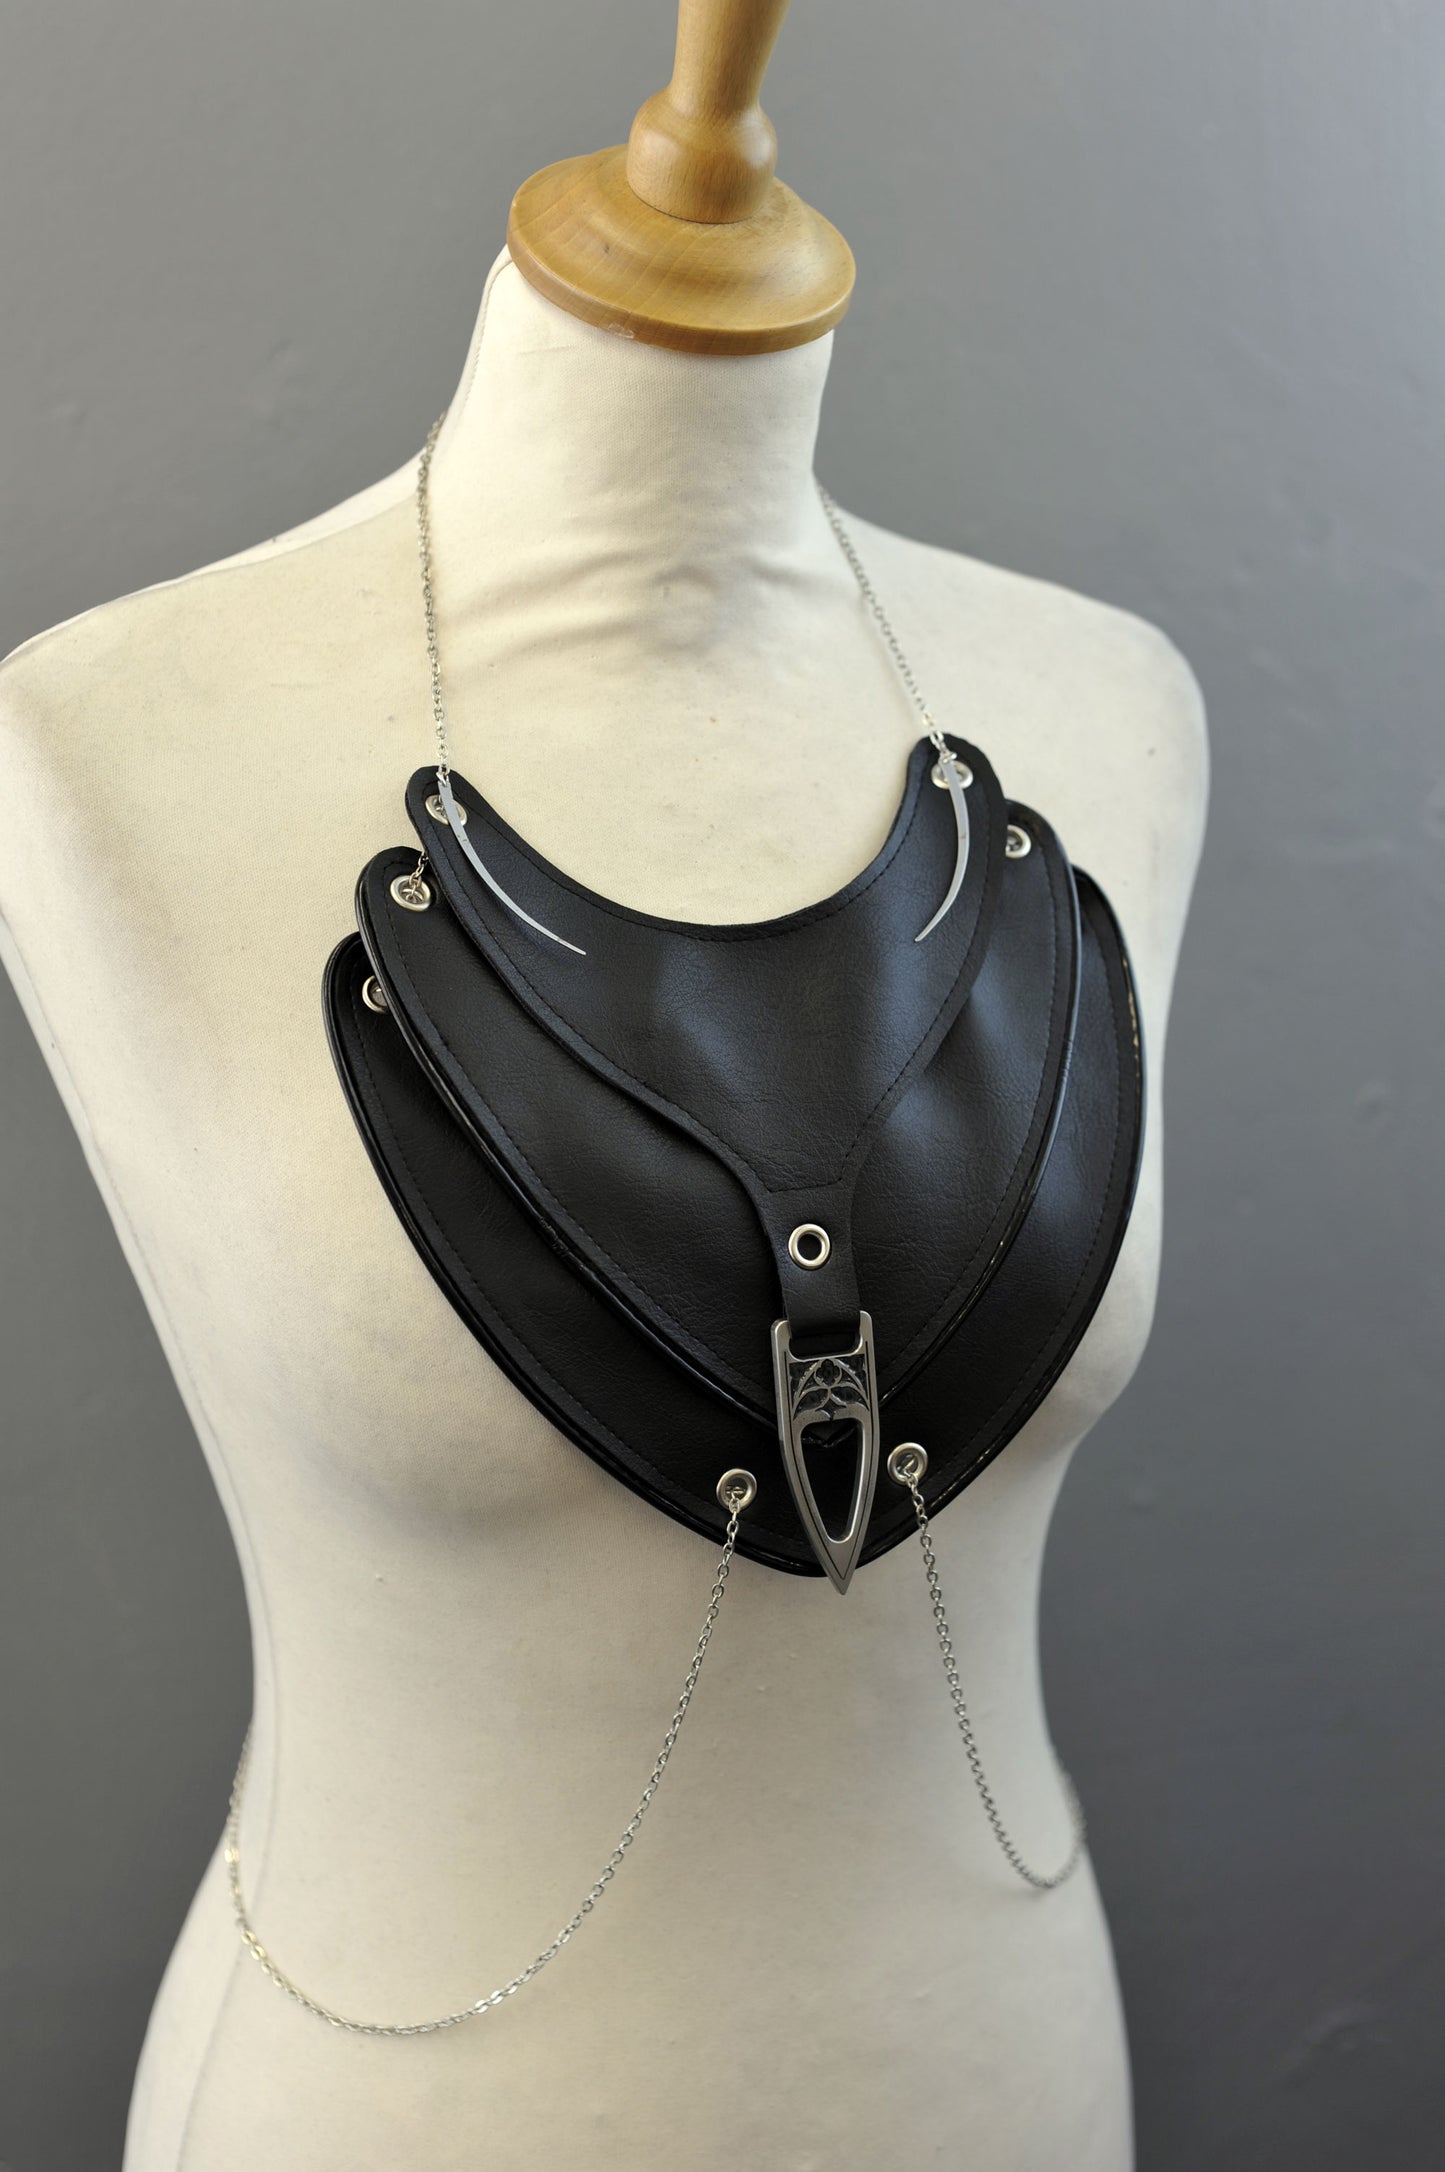 Cyber Goth Breastplate Armour Gorget Necklace, Futuristic Plastron Jewellery